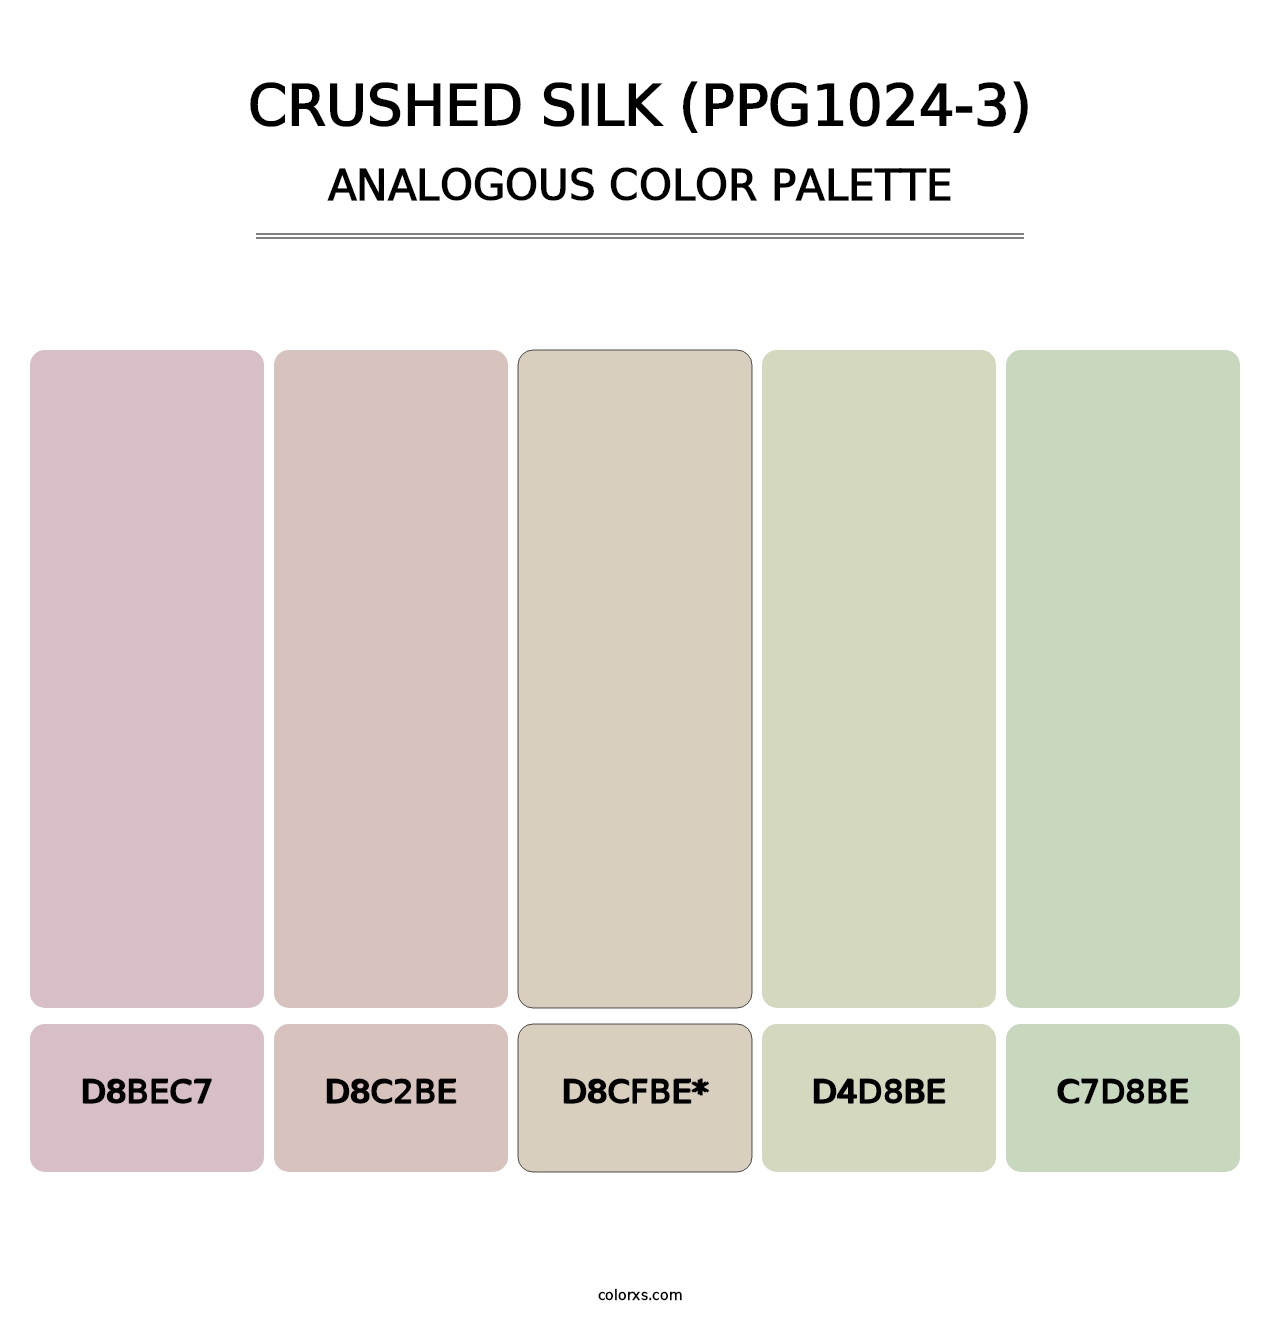 Crushed Silk (PPG1024-3) - Analogous Color Palette